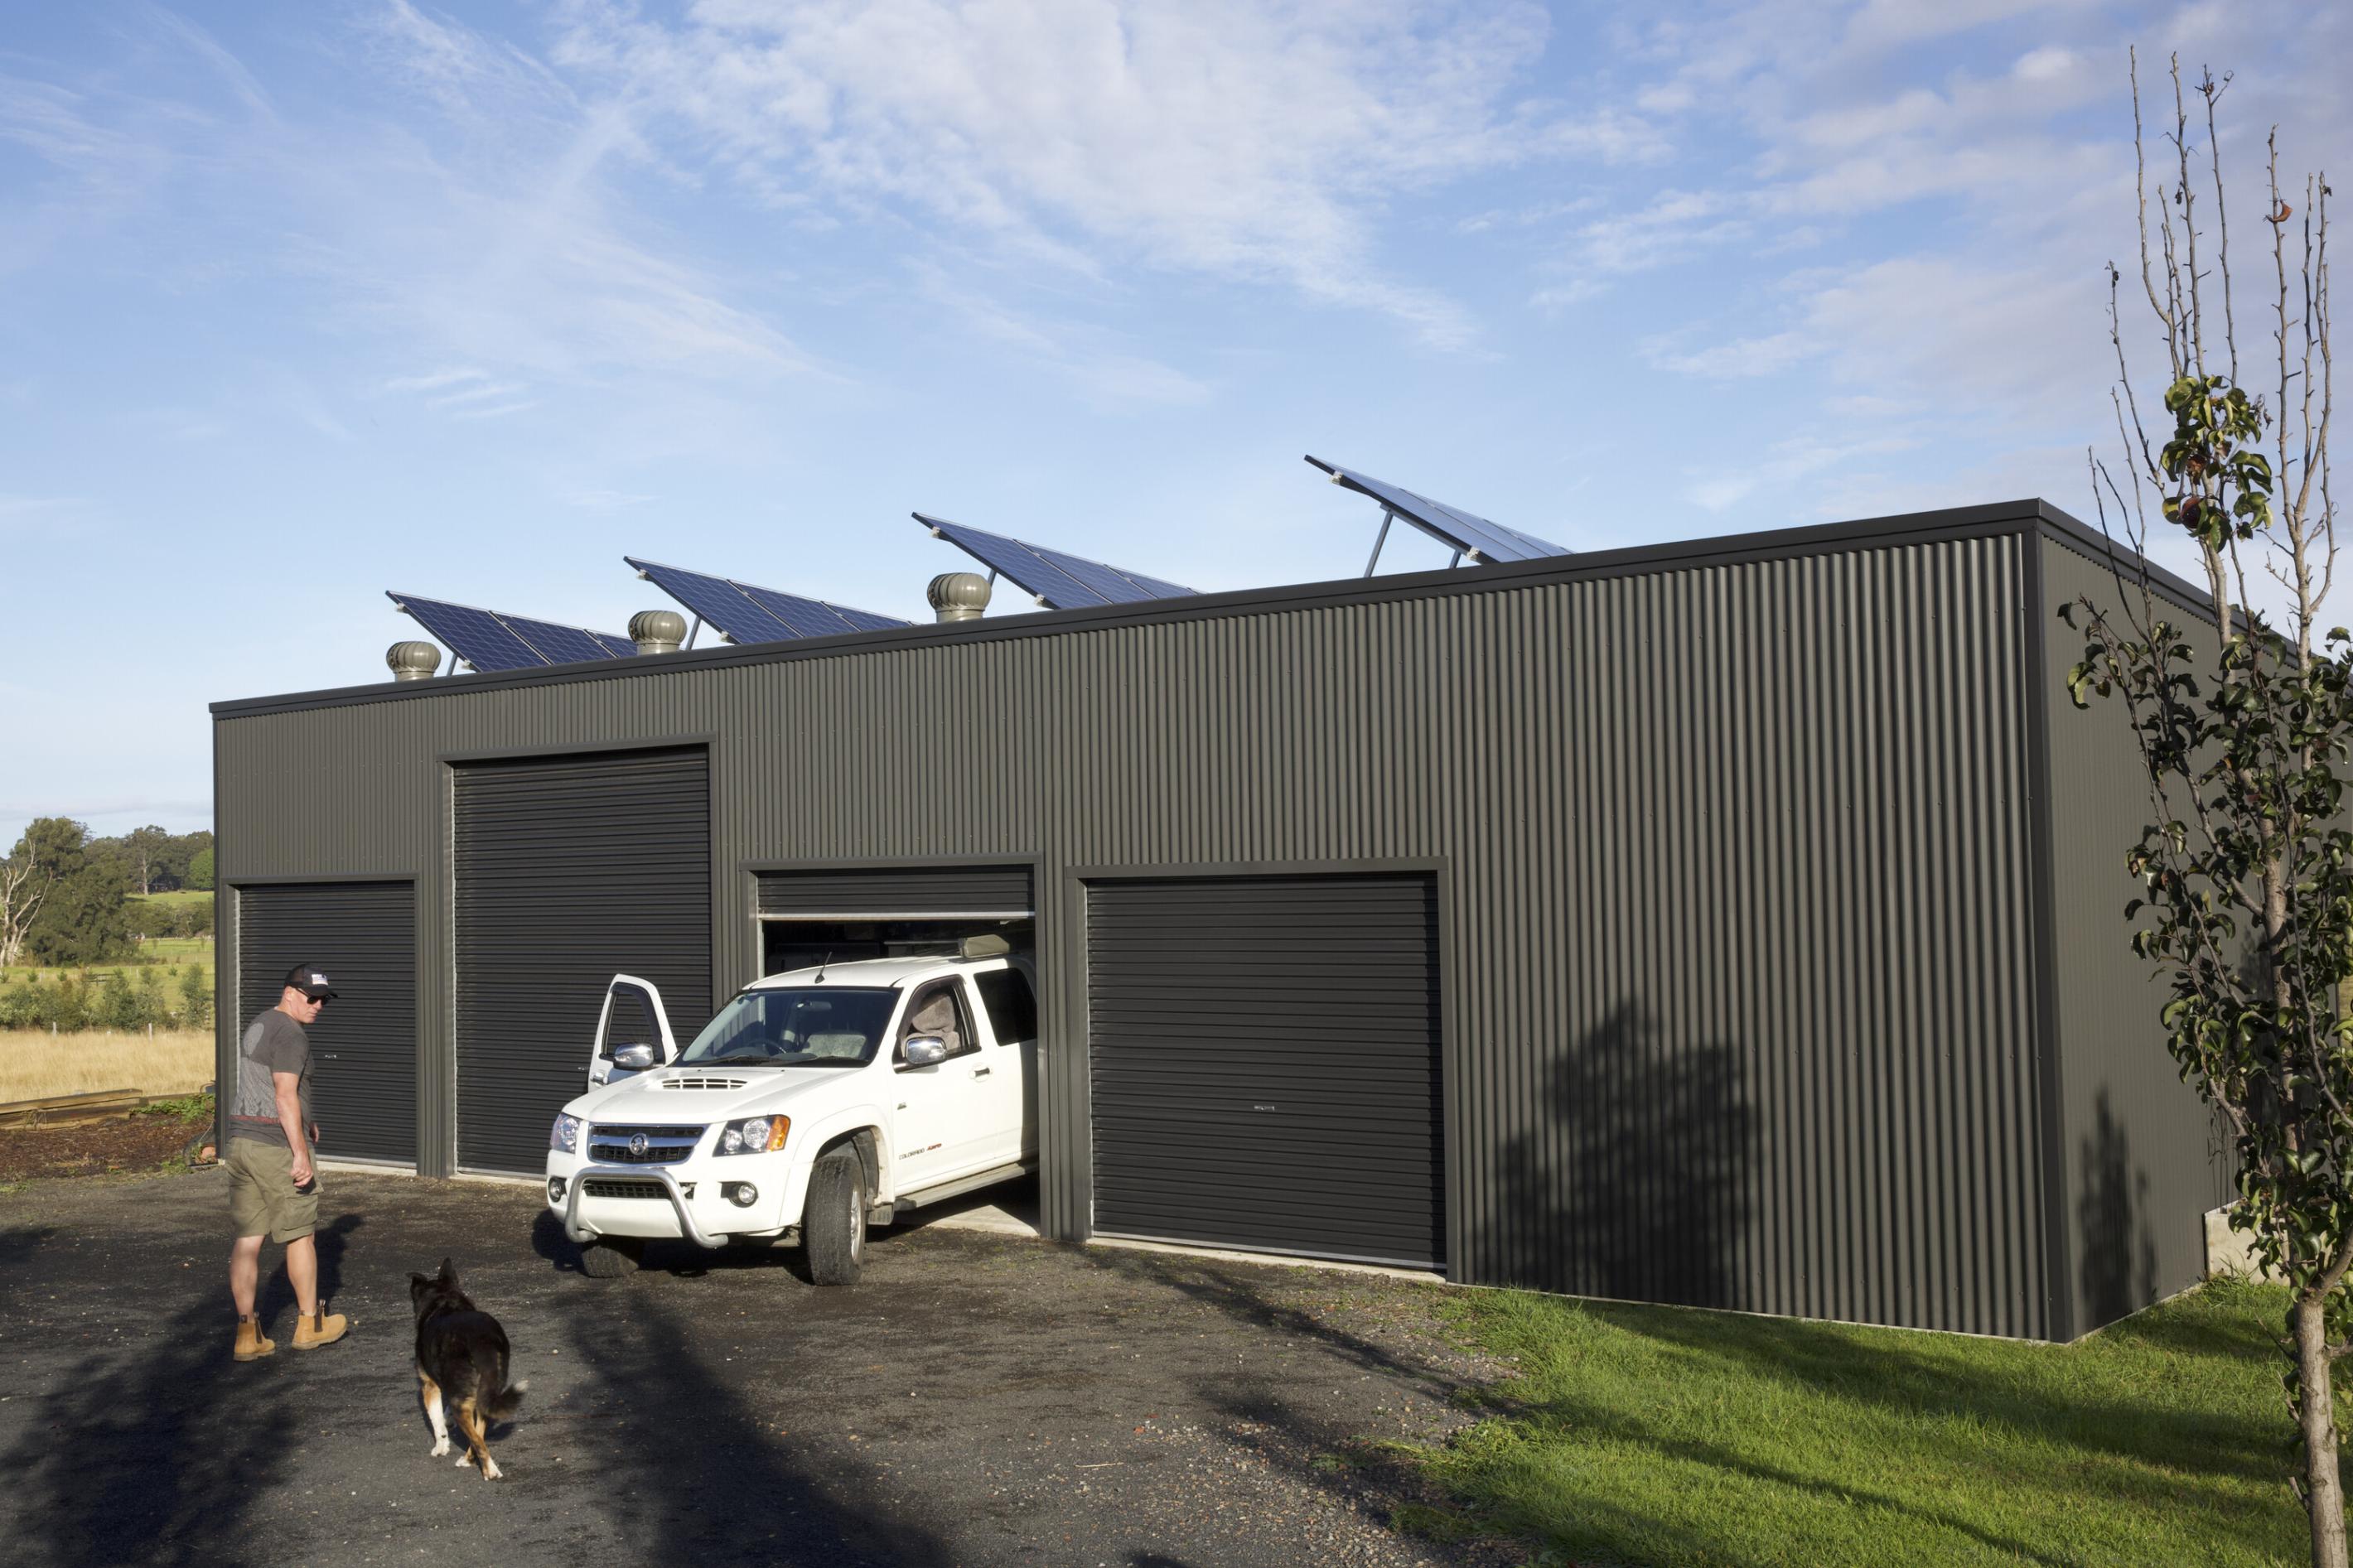 Gym Shed Cambewarra NSW, made from COLORBOND® steel in the colour Woodland Grey® on the Walls, Monument® Doors and Trim